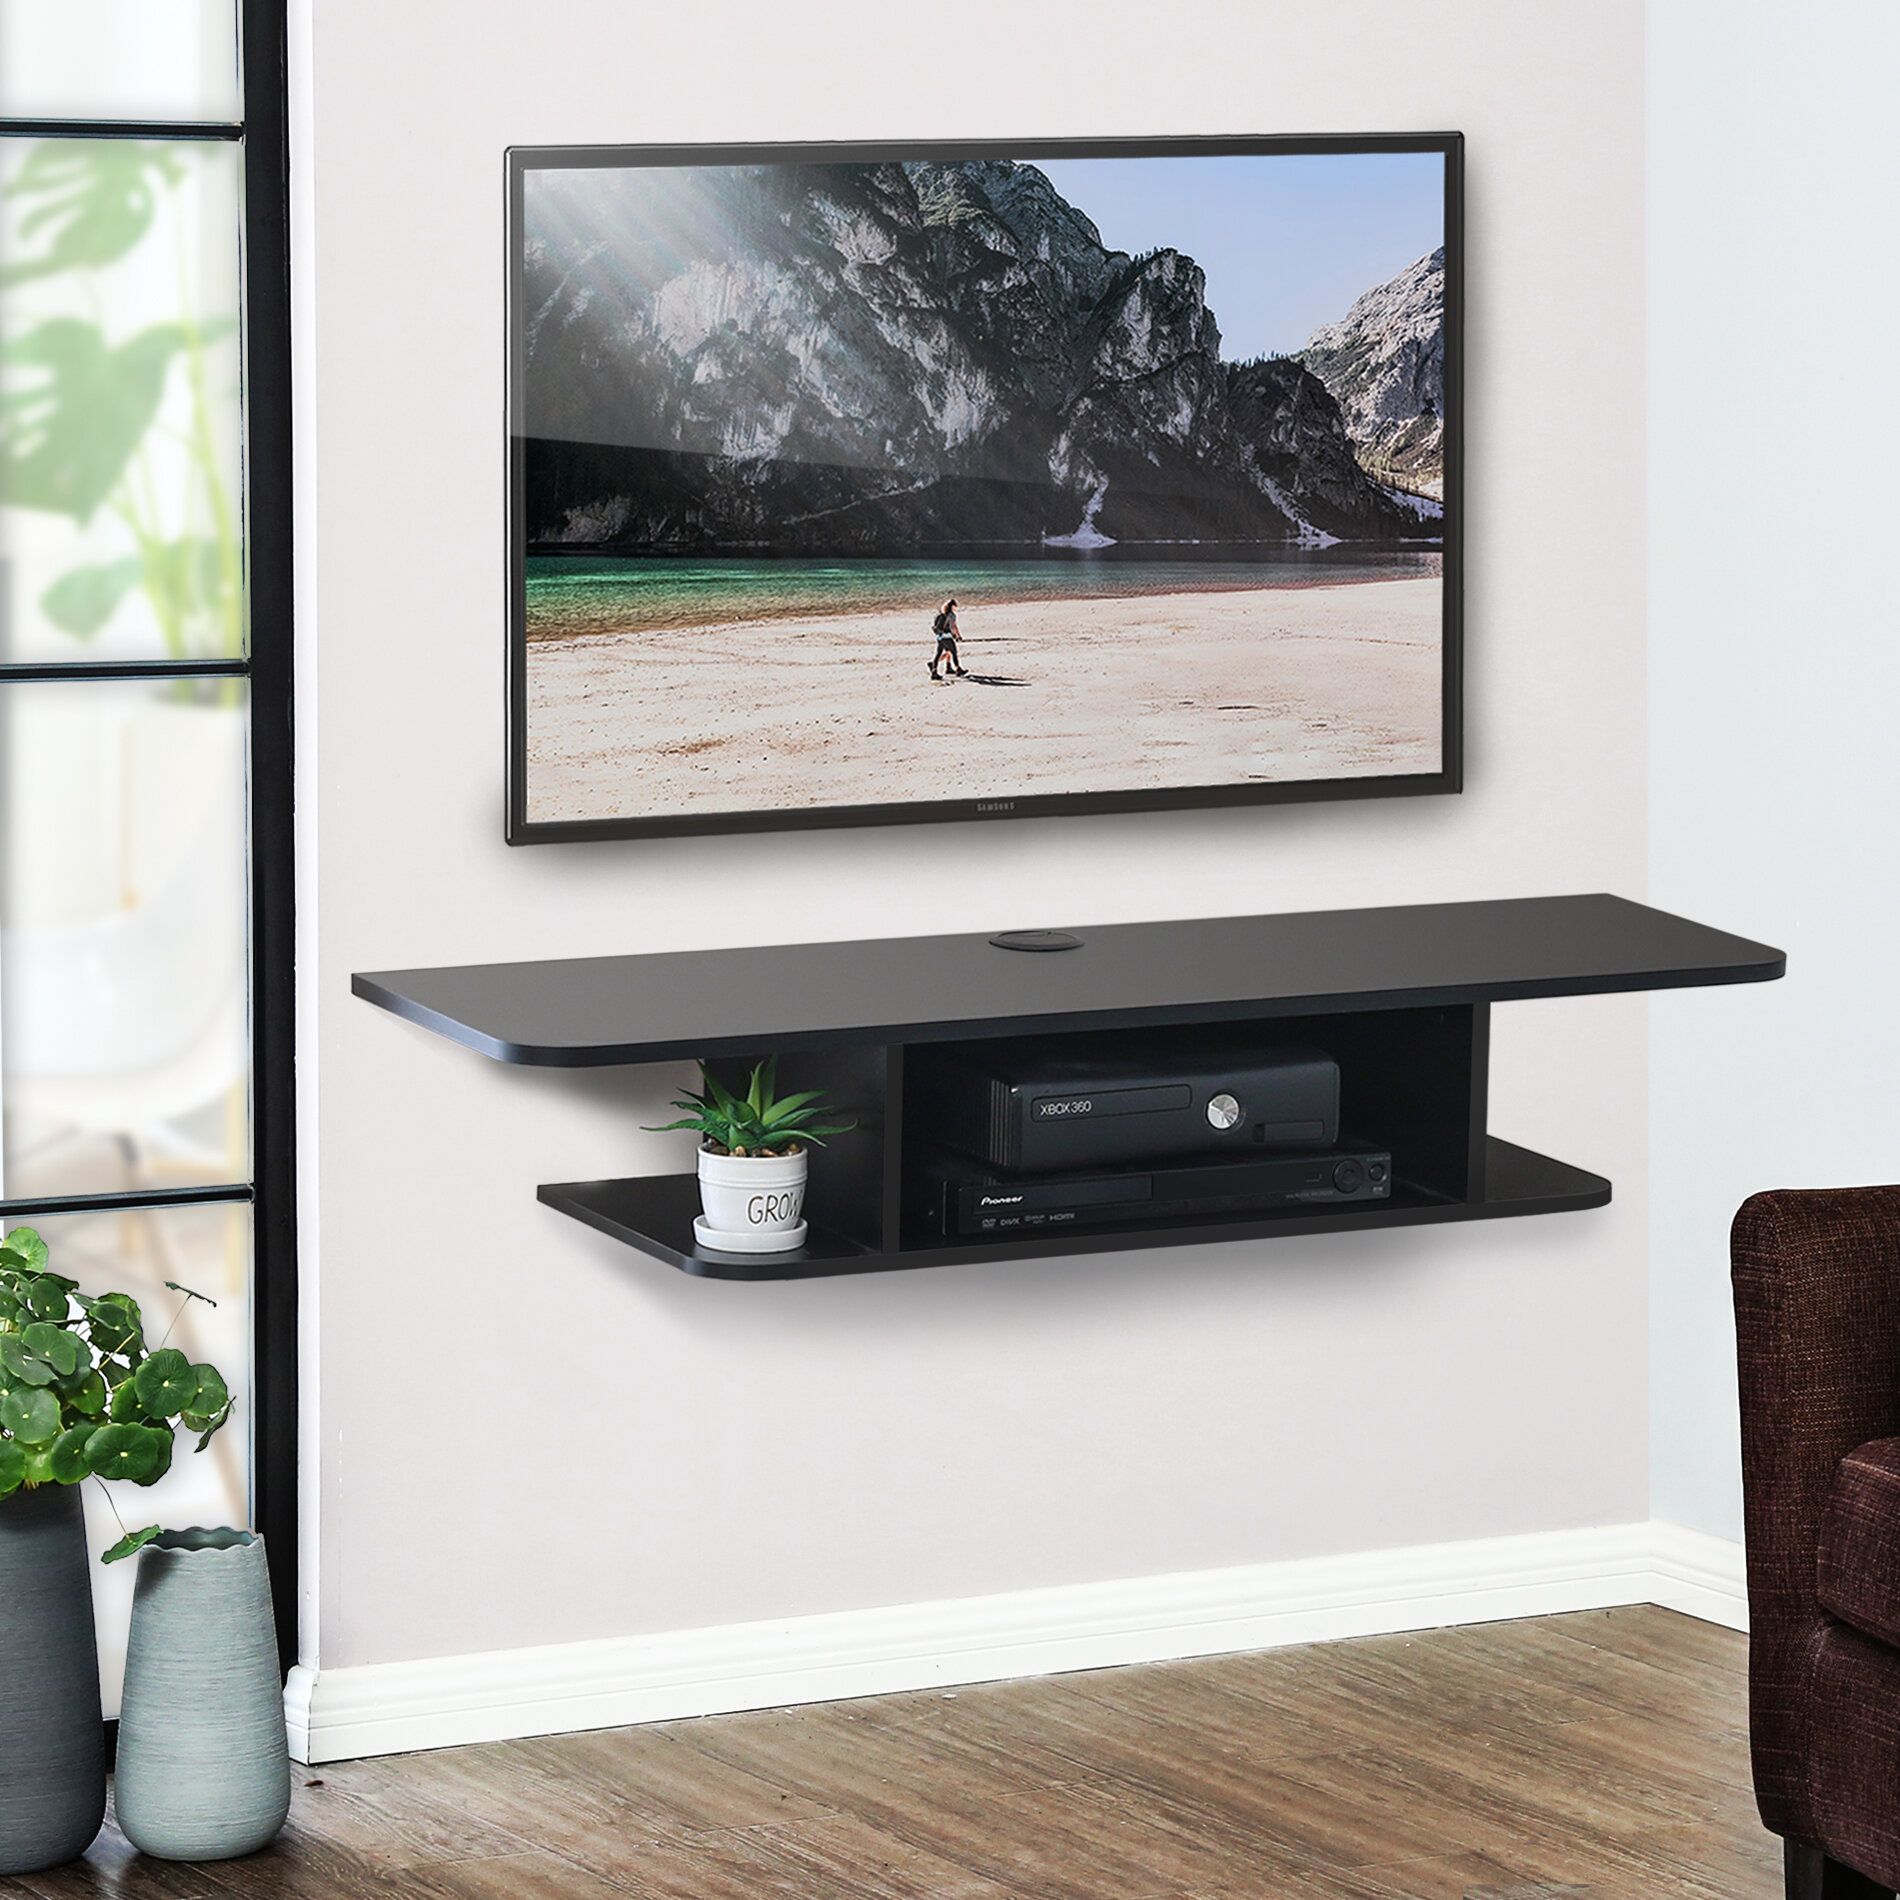 Floating Small Tv Stands & Entertainment Centers You'll Love In 2021 Pertaining To Top Shelf Mount Tv Stands (View 13 of 20)